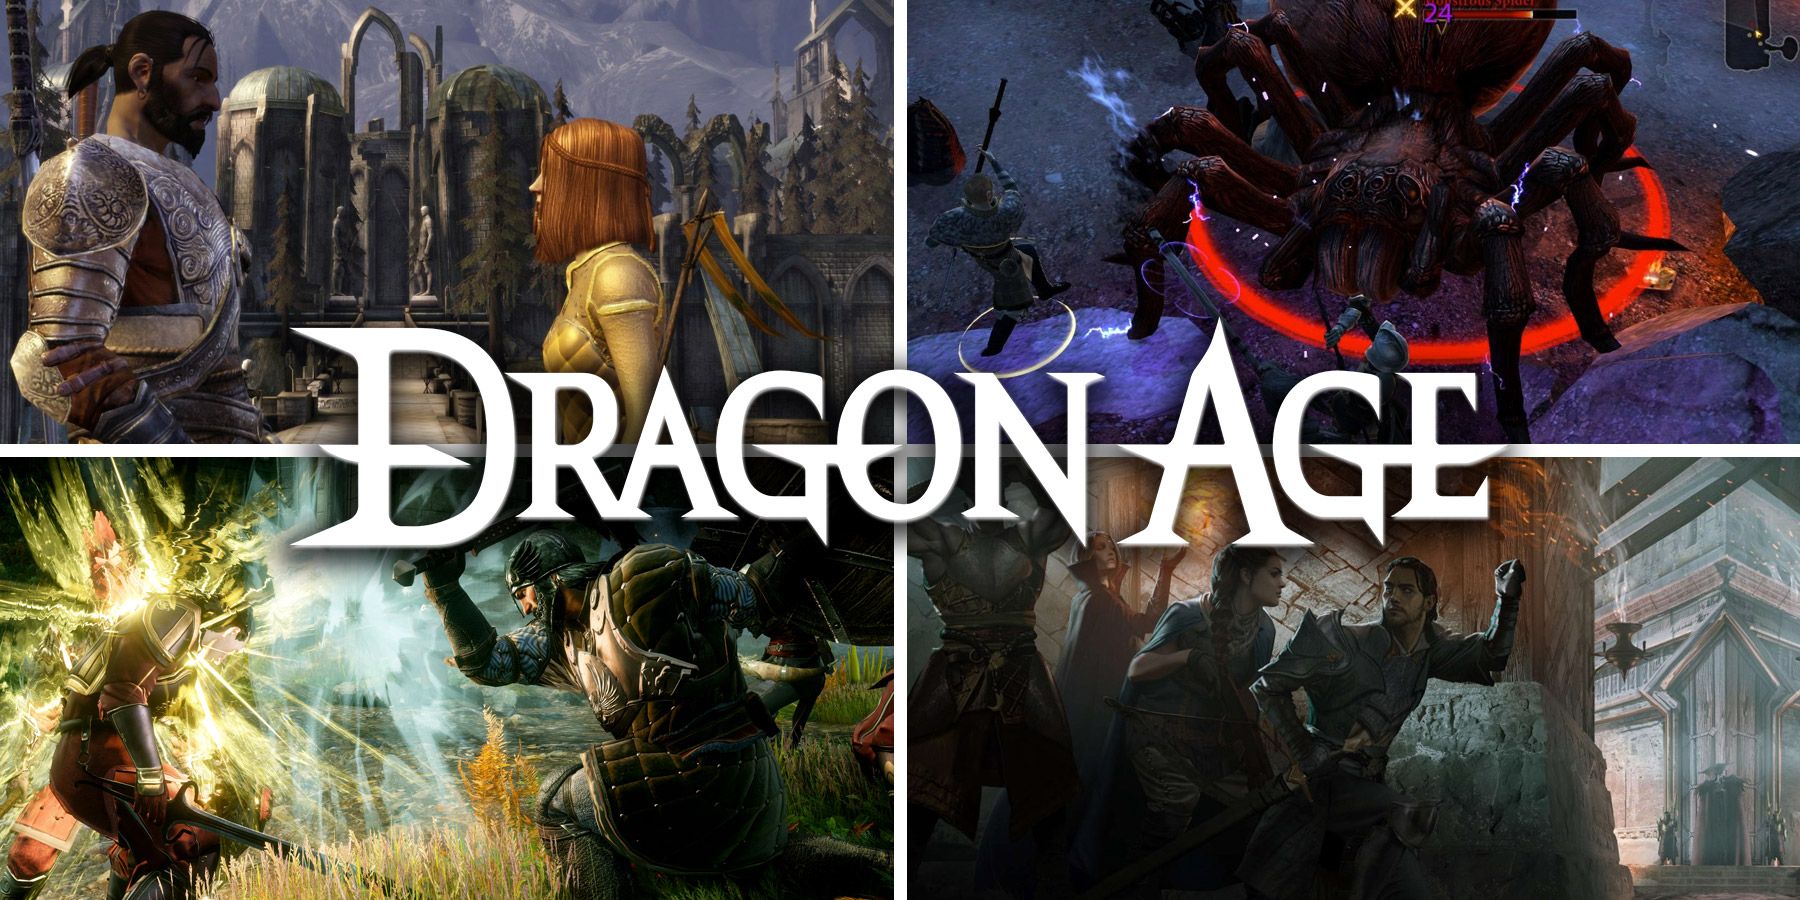 How long is Dragon Age: Origins?